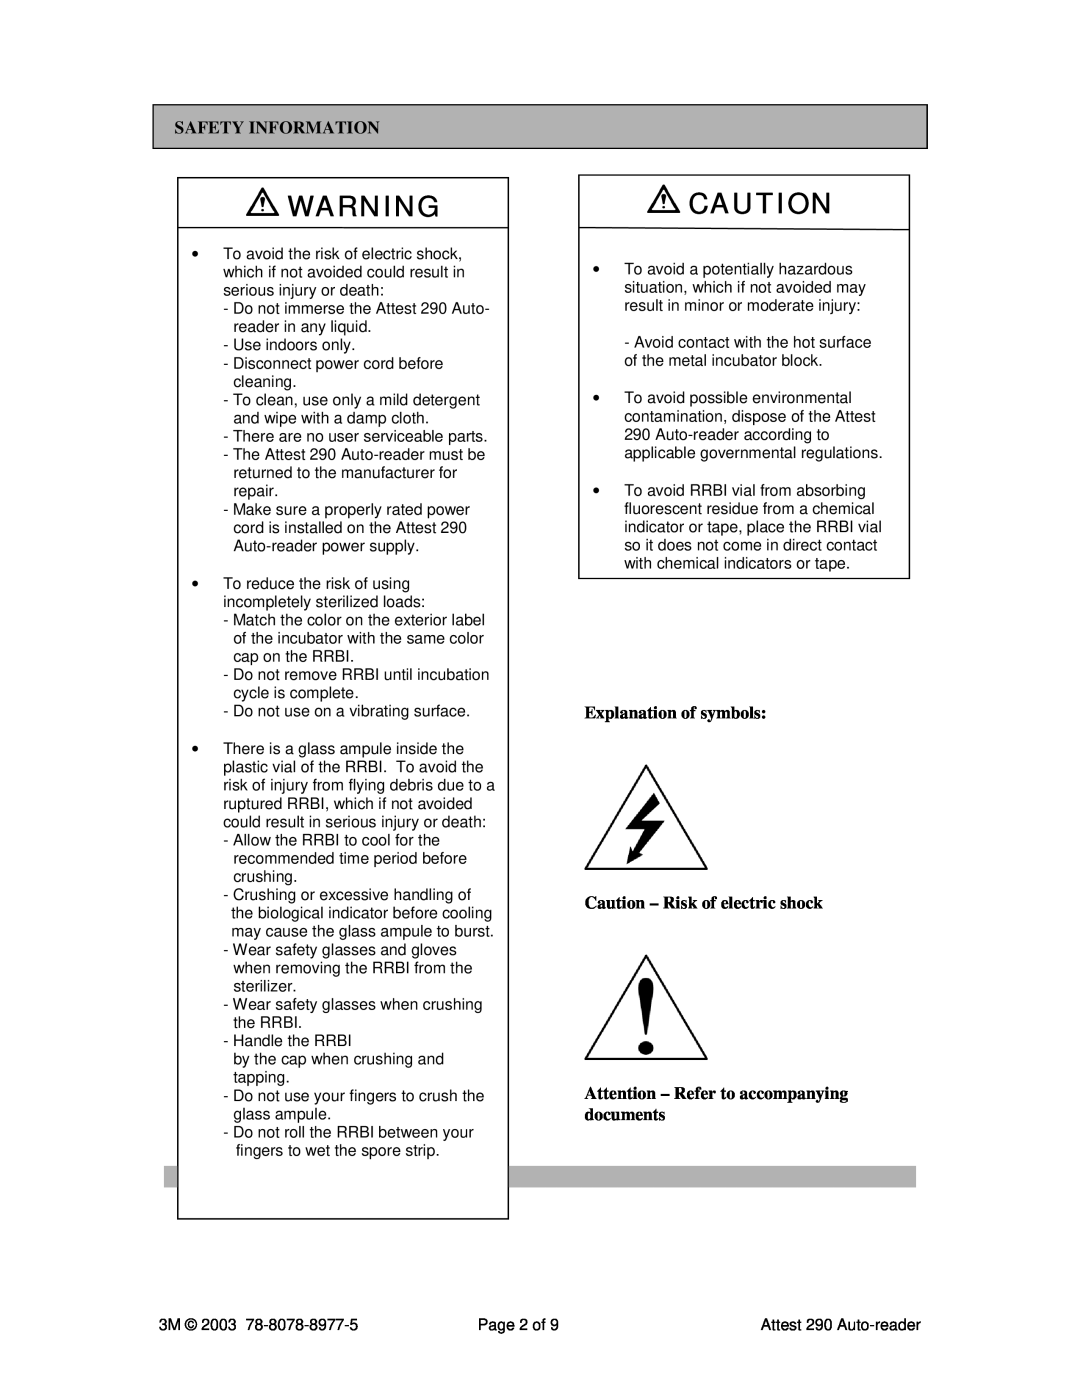 3M 290 manual Safety Information, Explanation of symbols Caution - Risk of electric shock 